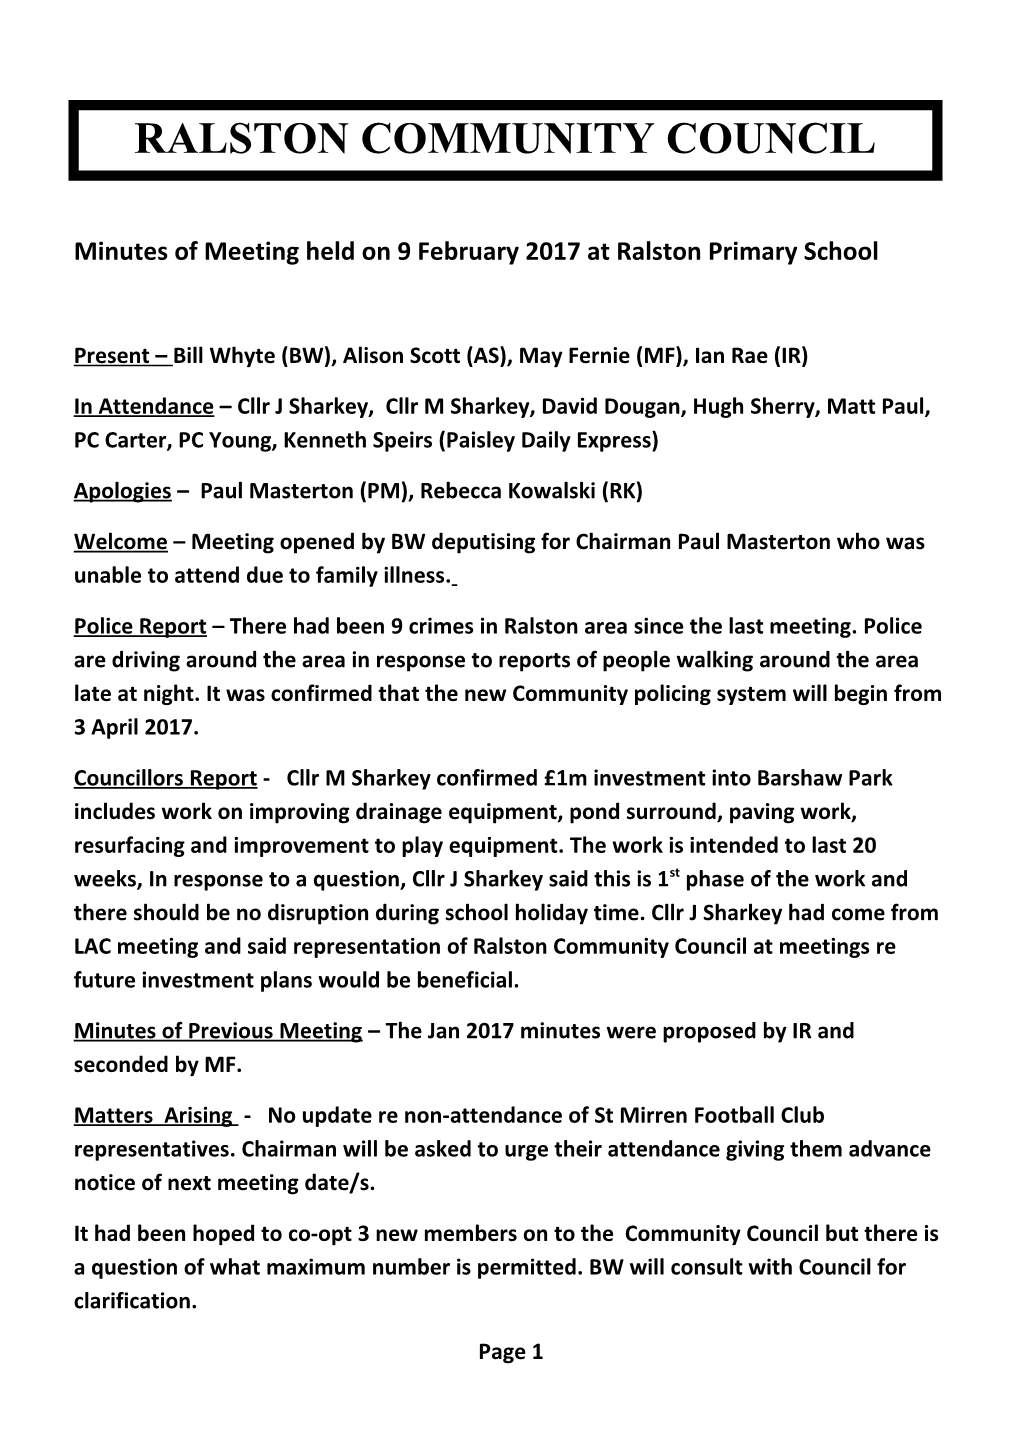 Minutes of Meeting Held on 9 February 2017 at Ralston Primary School